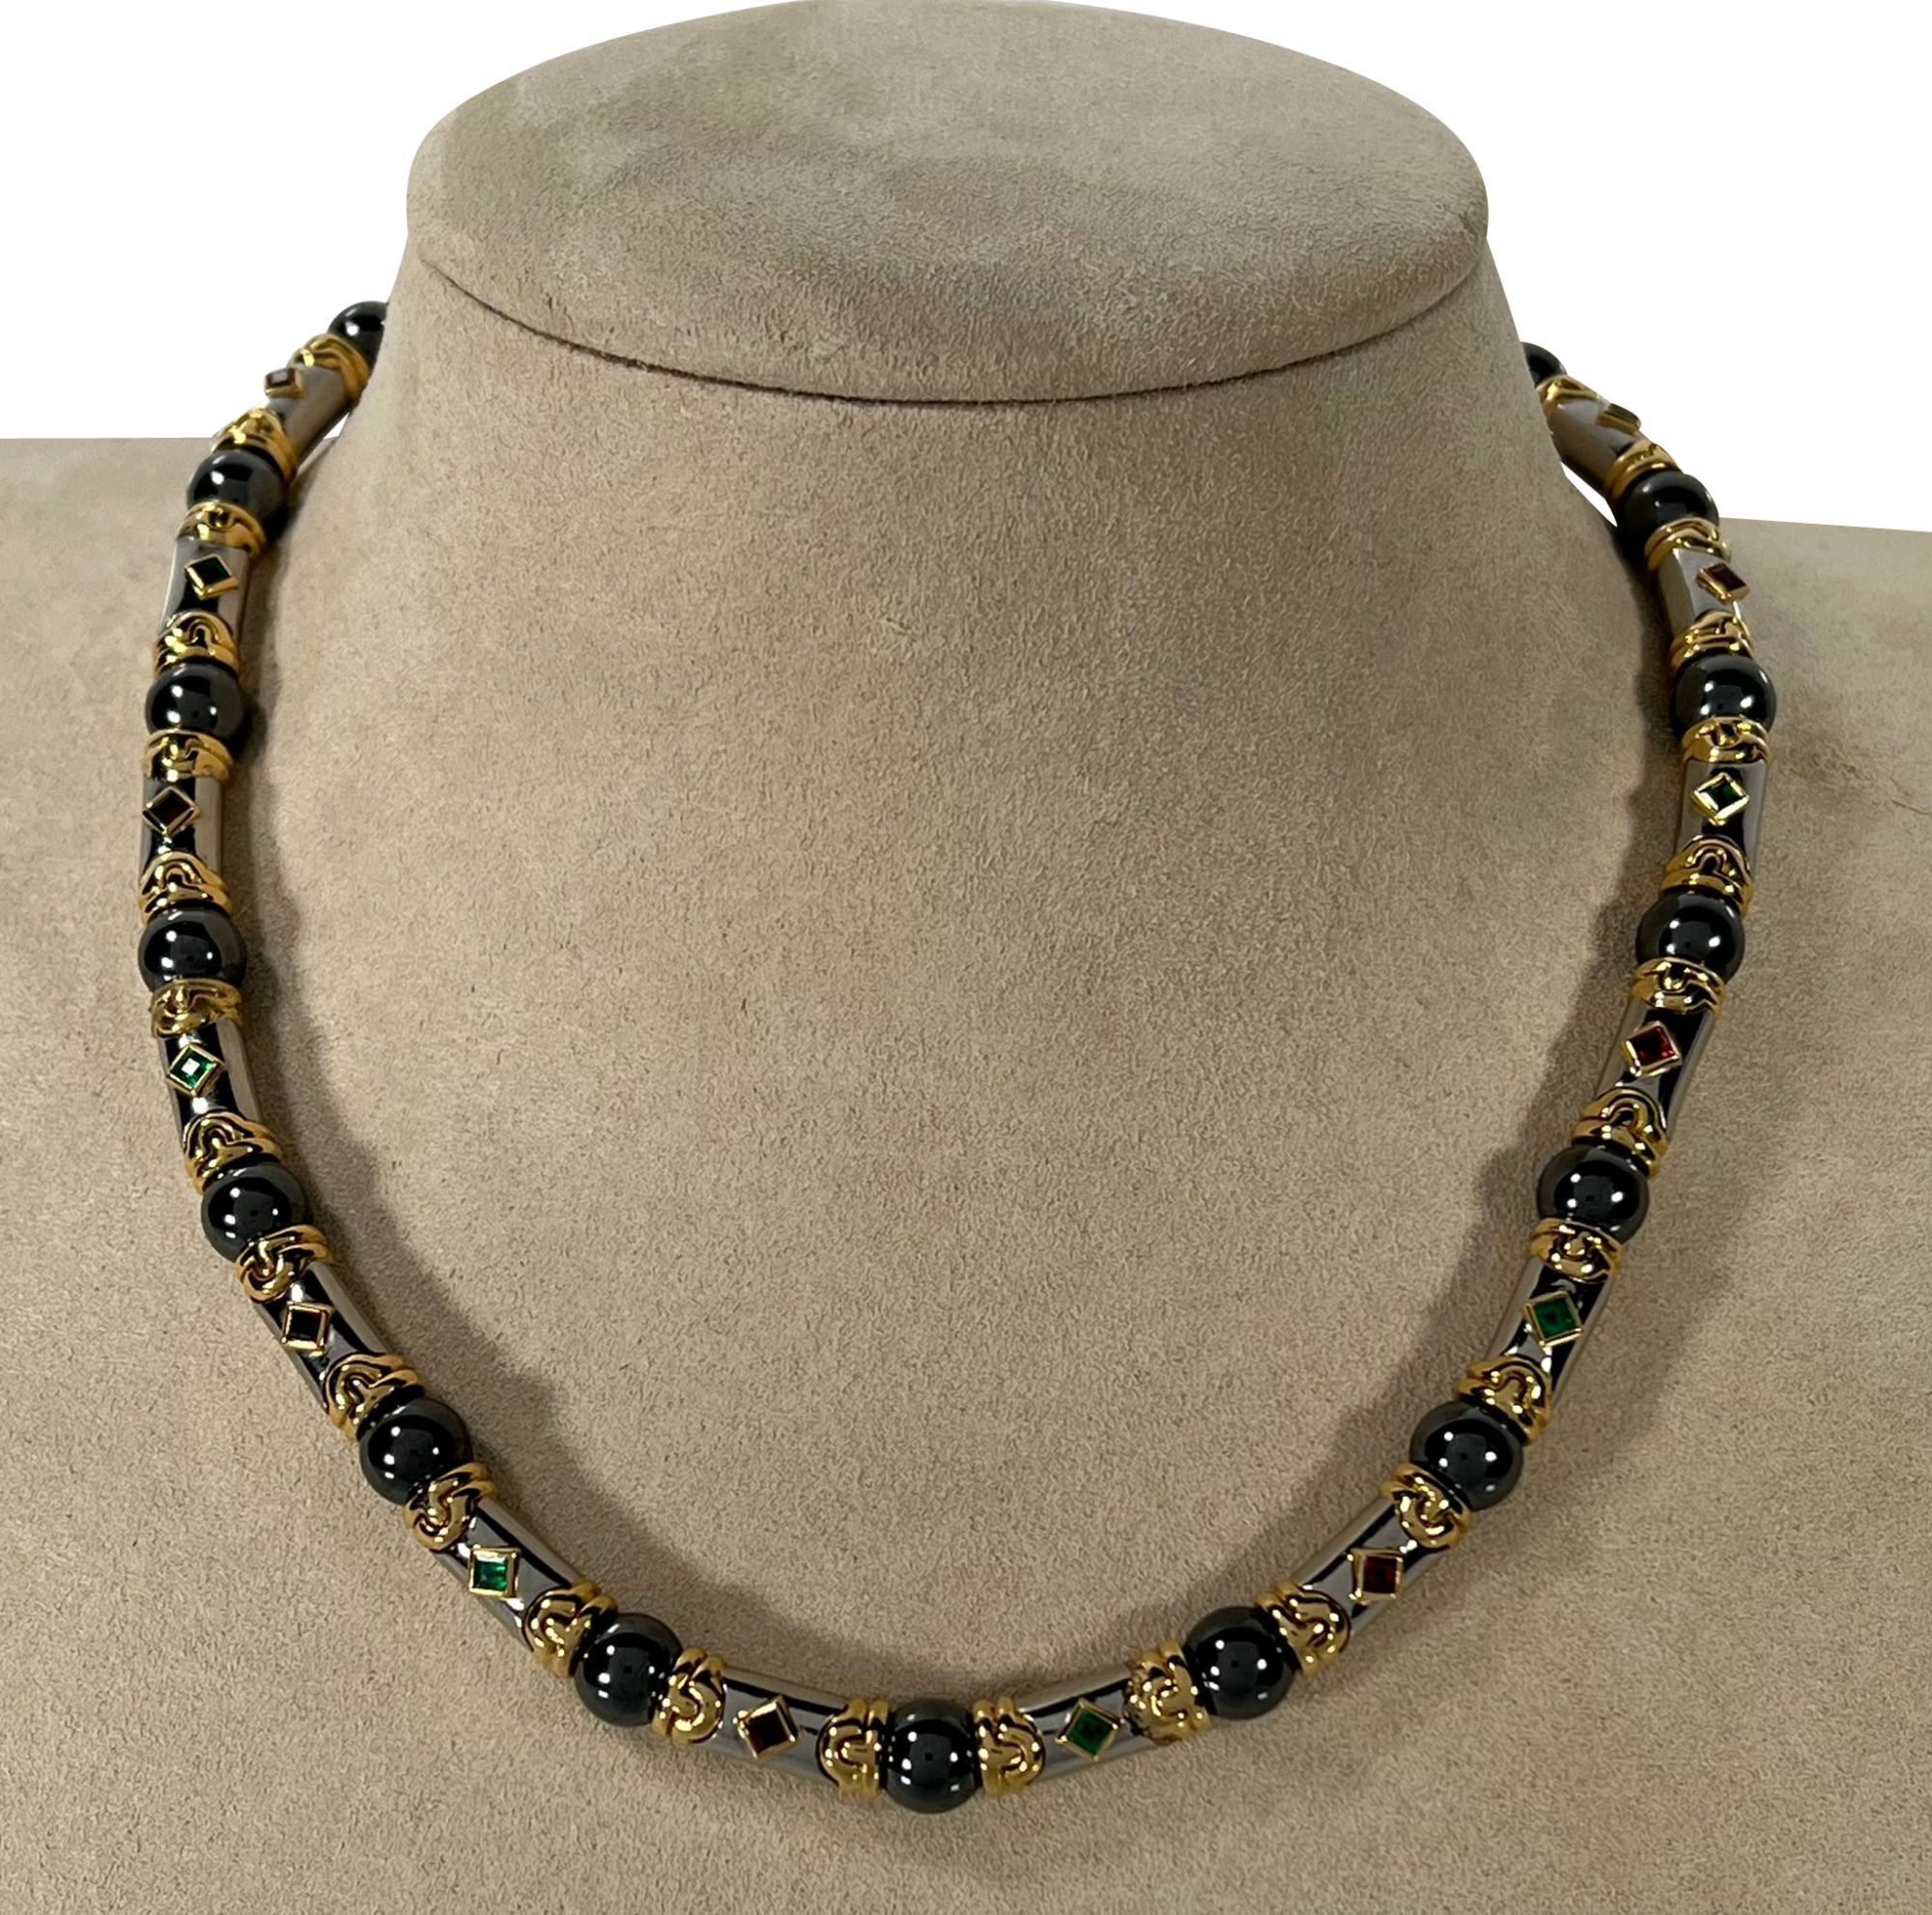 Bvlgari 18K Yellow Gold Stainless Steel Ruby & Emerald Necklace with Hematite Beads